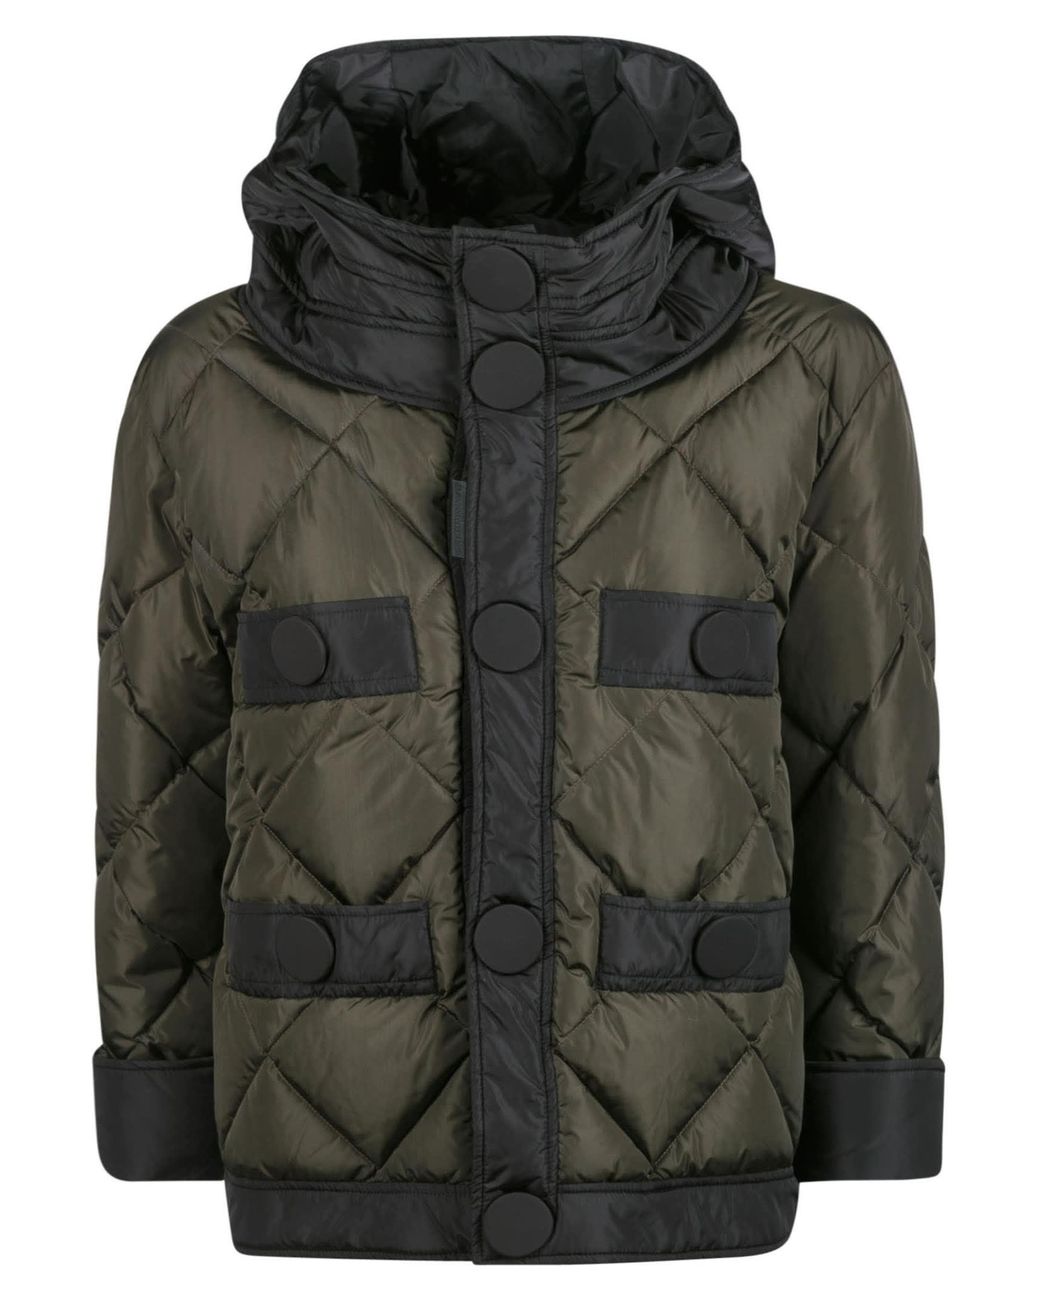 DSquared² Hooded Quilted Jacket in Black | Lyst